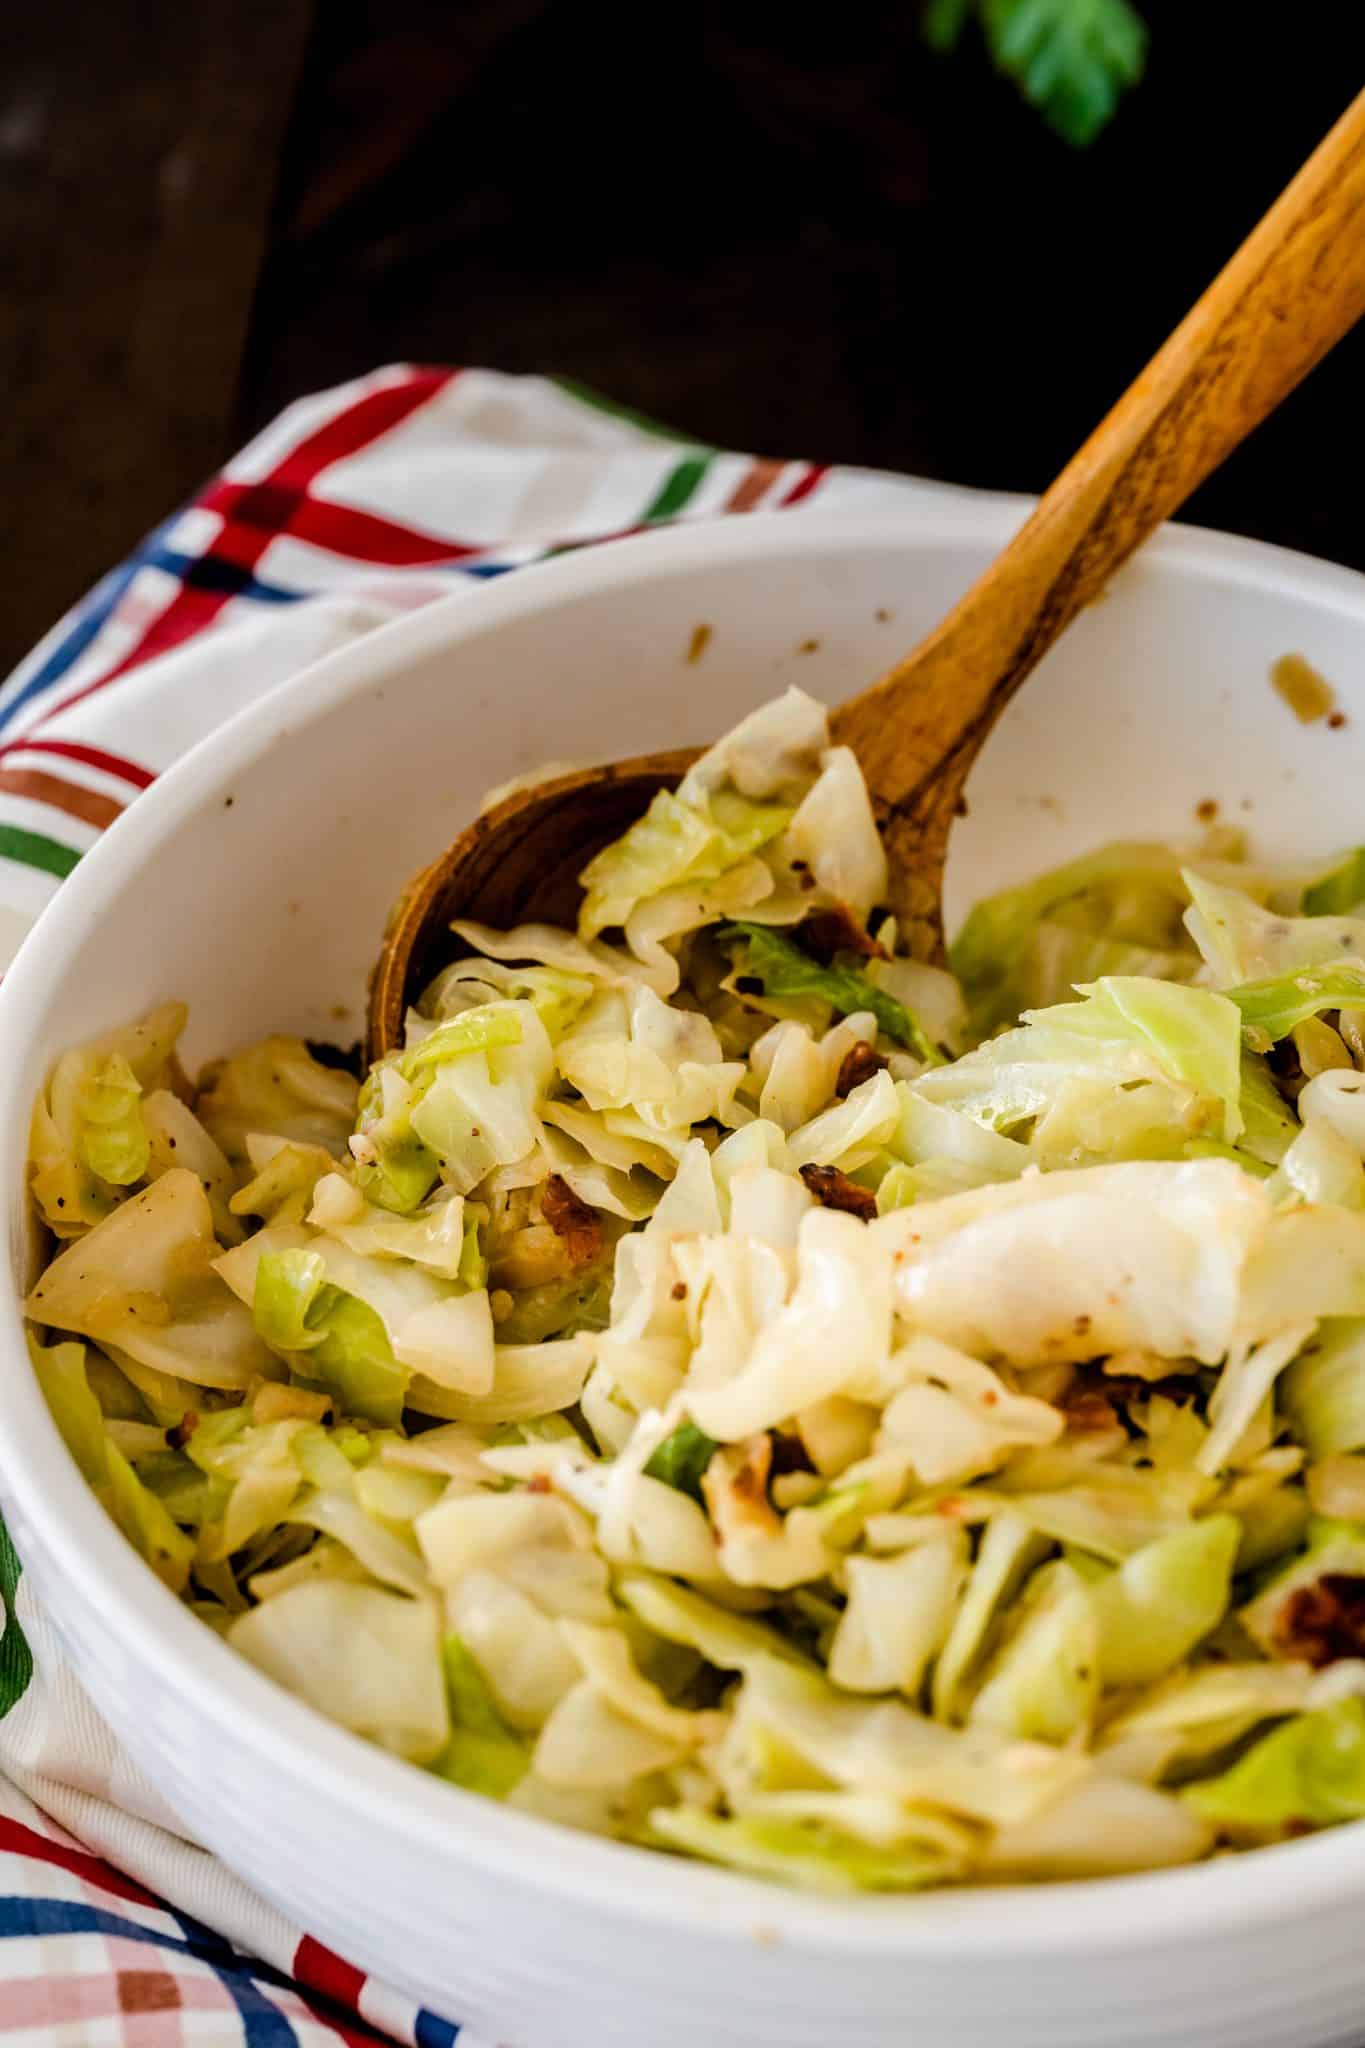 Delicious Fried Cabbage and Bacon